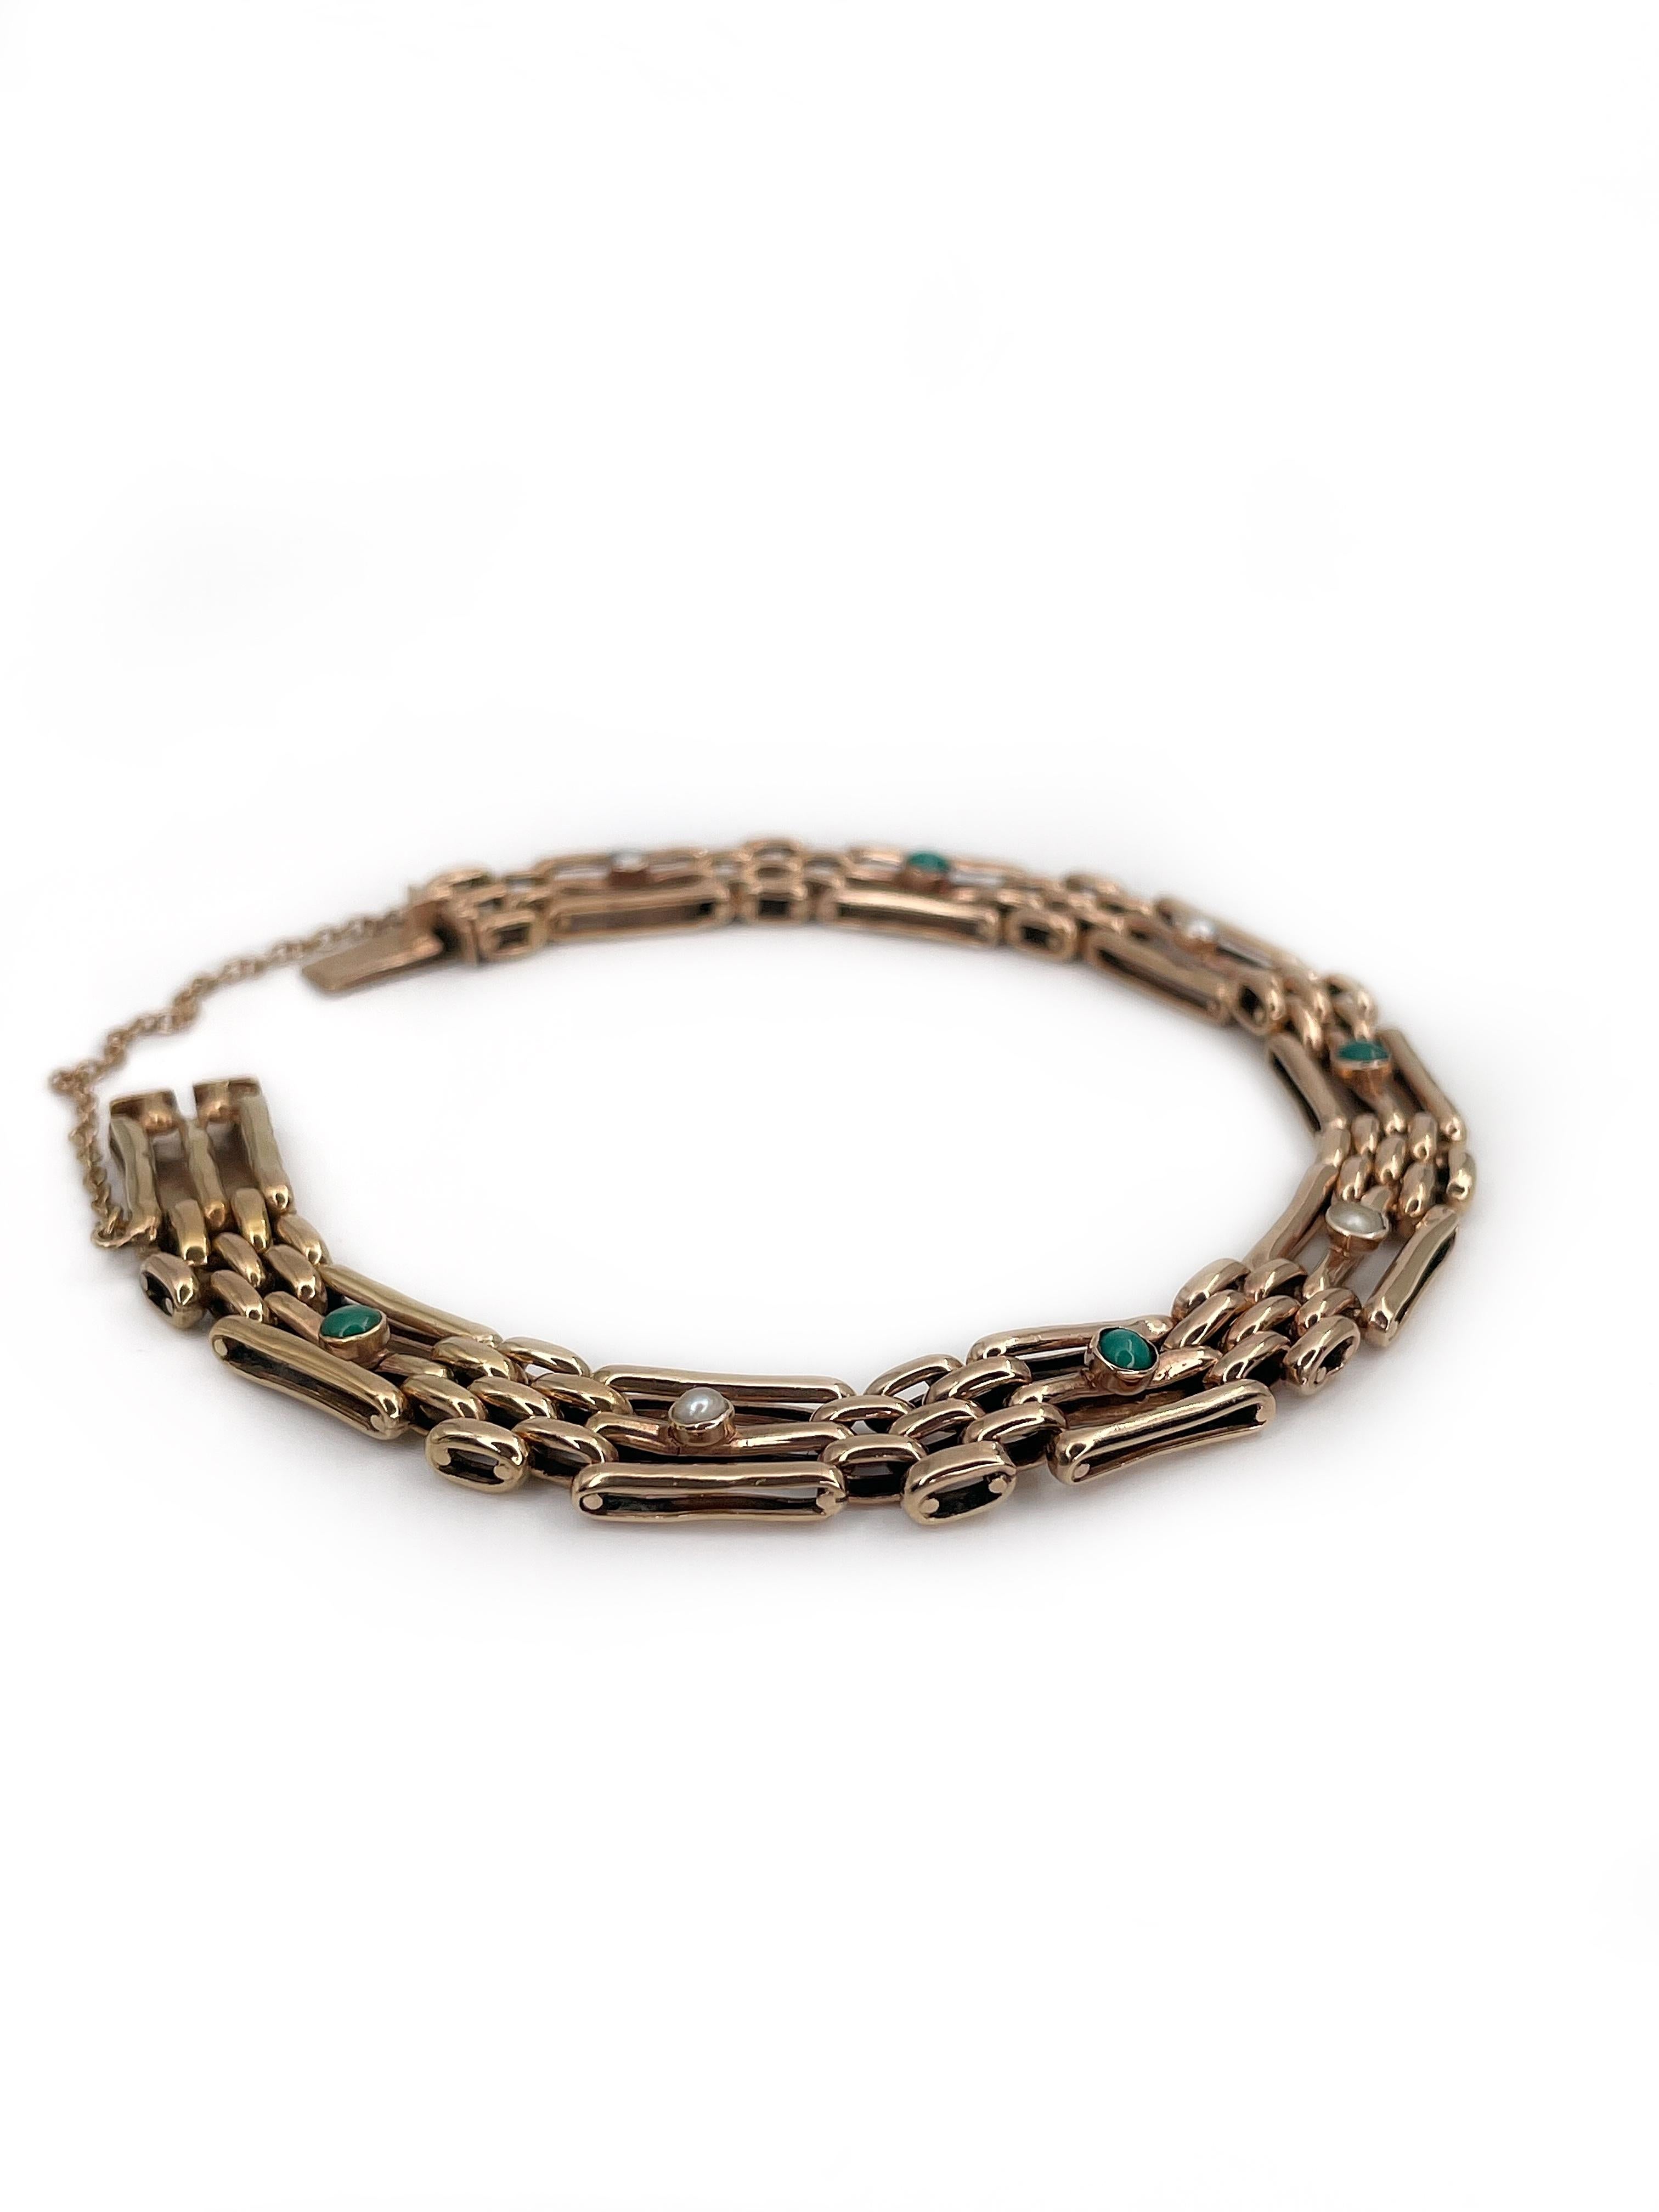 This is a stunning gate bracelet crafted in 9K rosy yellow gold. The piece features 4 turquoises and 4 seed pearls. 

The bracelet is very comfortable to wear. It also has a safety chain.

Weight: 12.14g
Length: 19.5cm
Width: 0.8cm